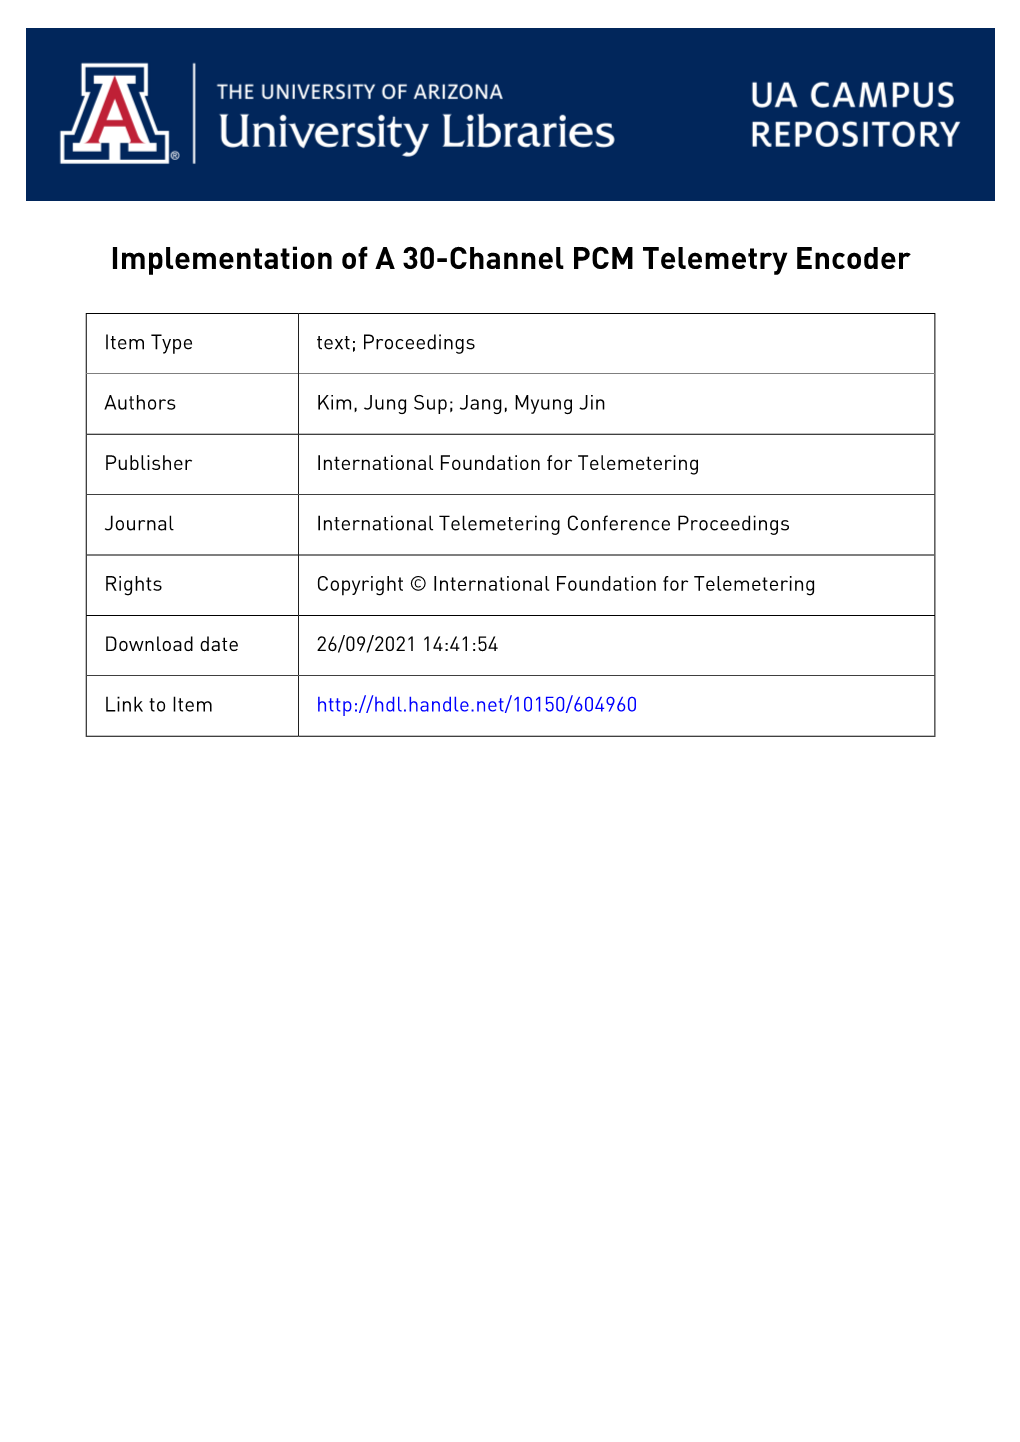 Implementation of a 30-Channel PCM Telemetry Encoder